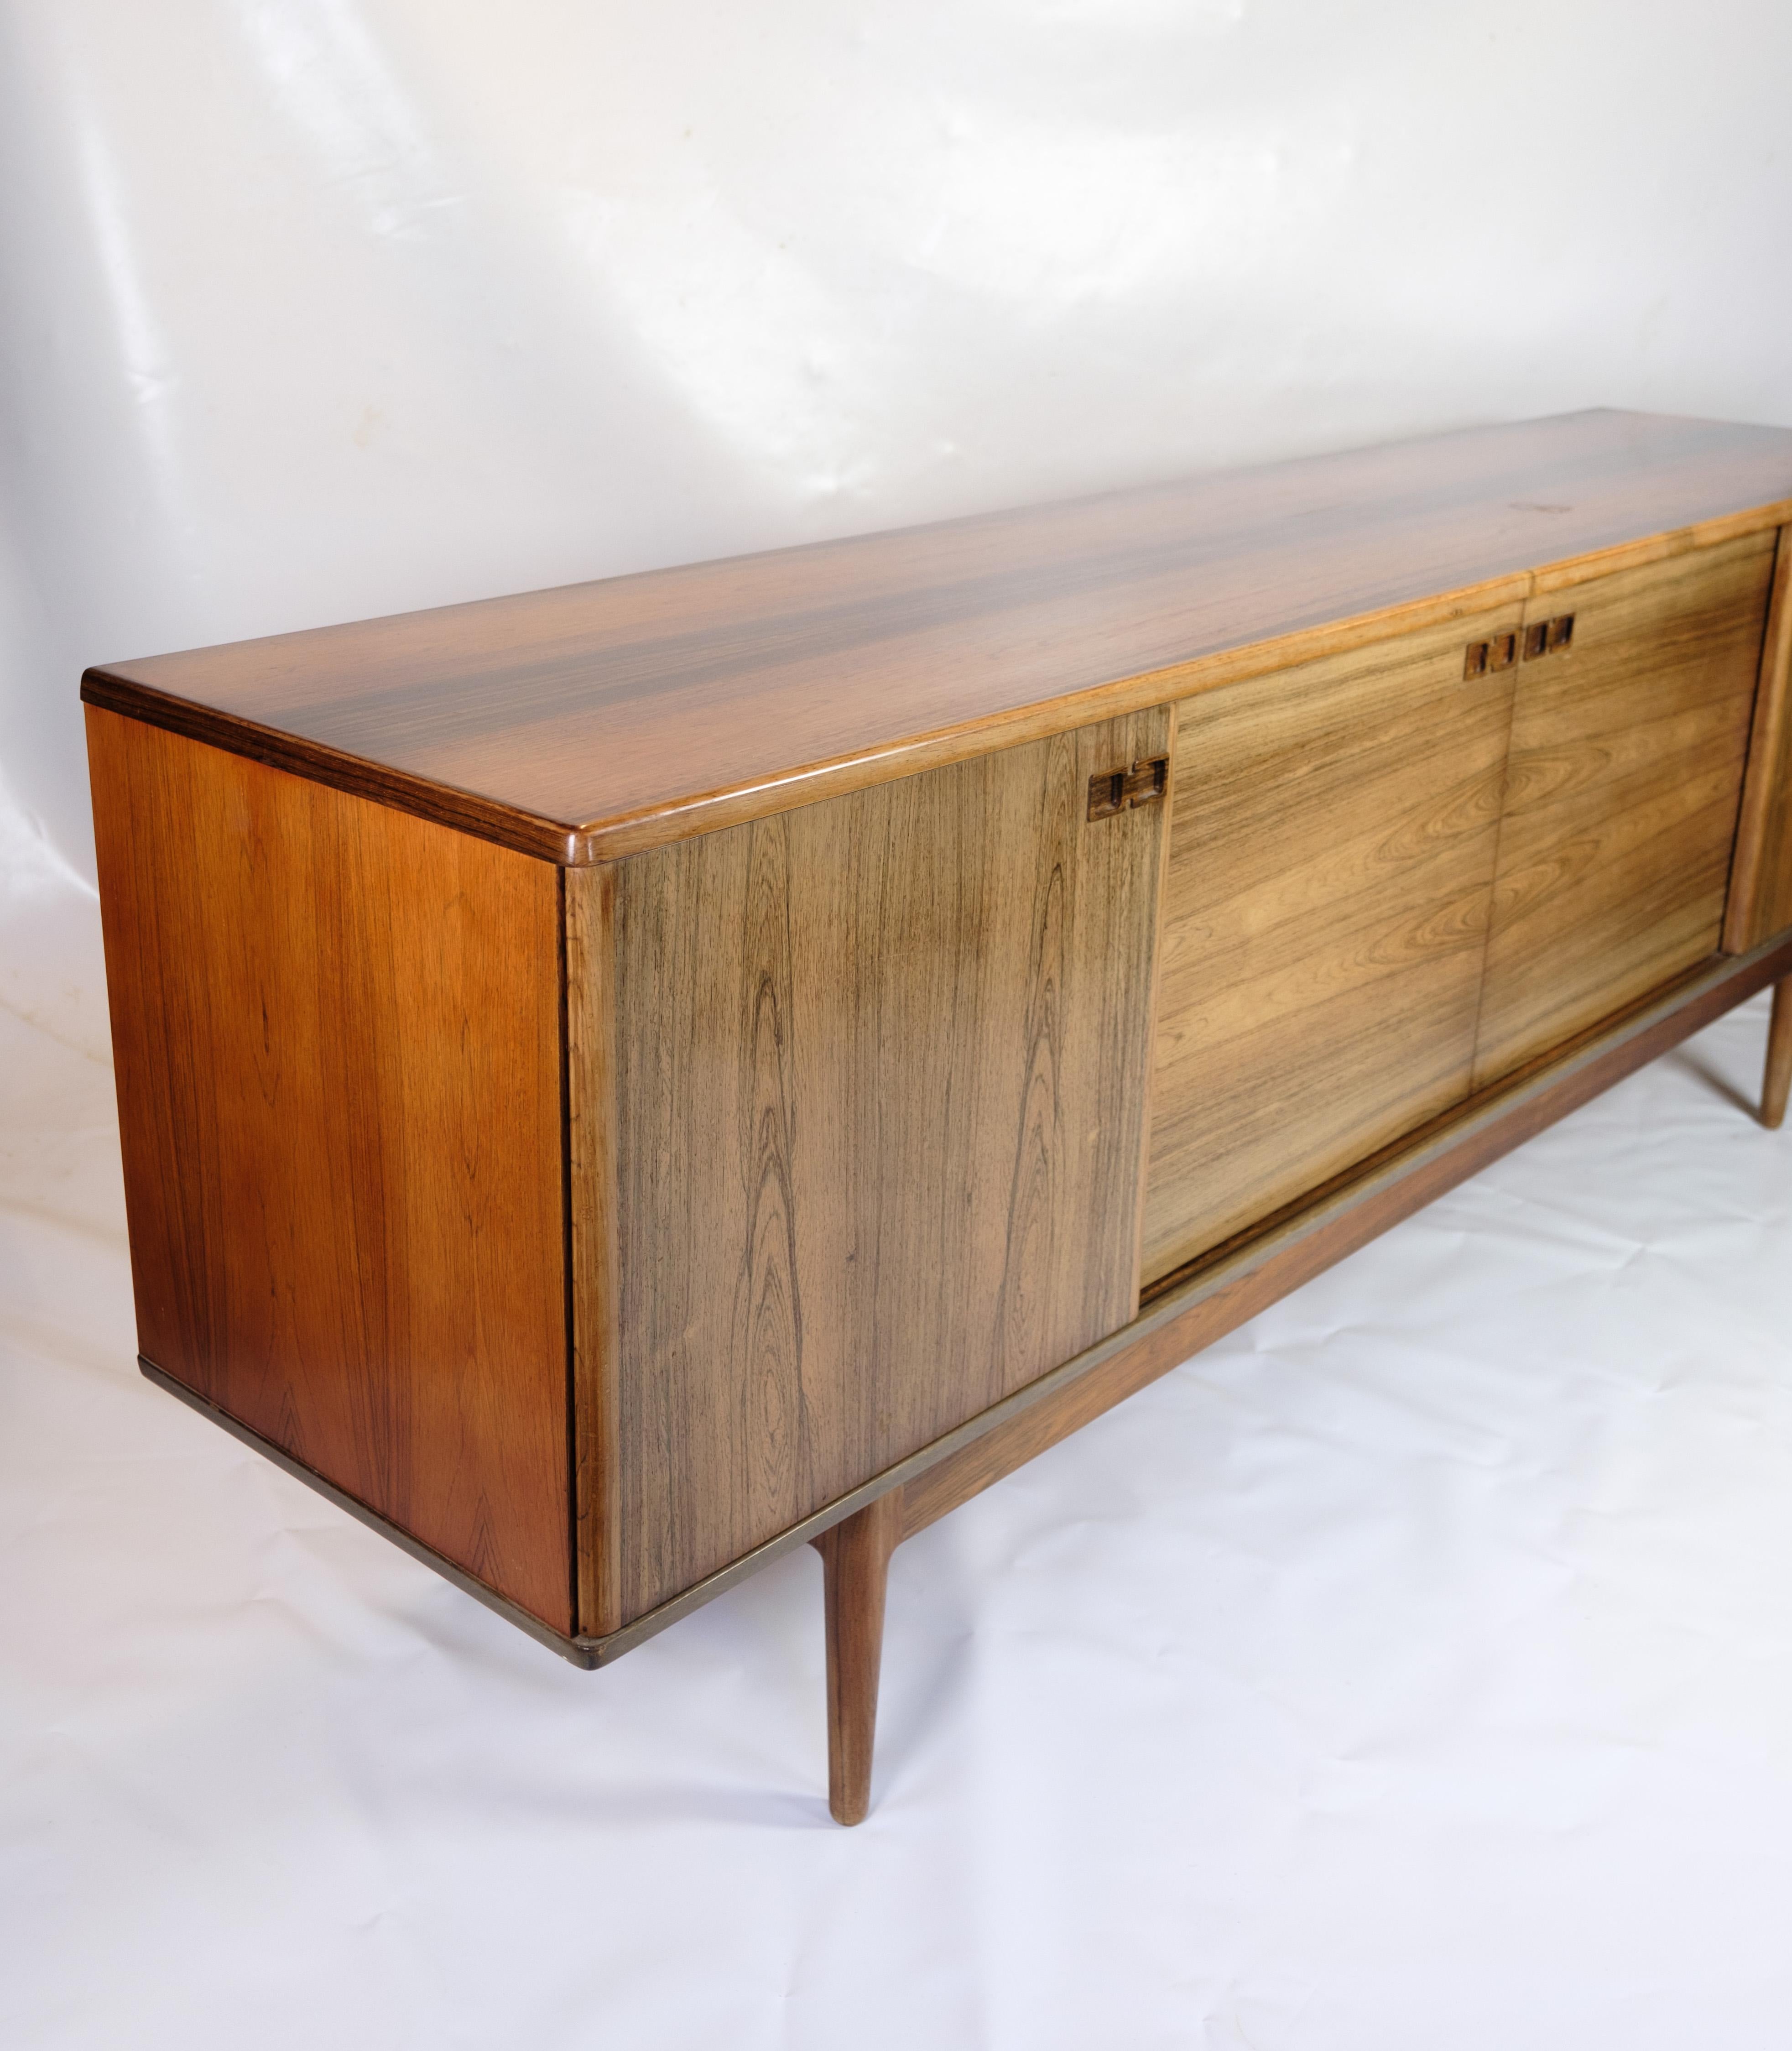 Christian Linneberg made a low sideboard that is veneered with rosewood. It has four sliding doors on the front, behind which there are shelves and a pull-out tray. The sideboard stands on tapered legs and measures H. 83 cm, L. 225 cm, D. 50 cm. It